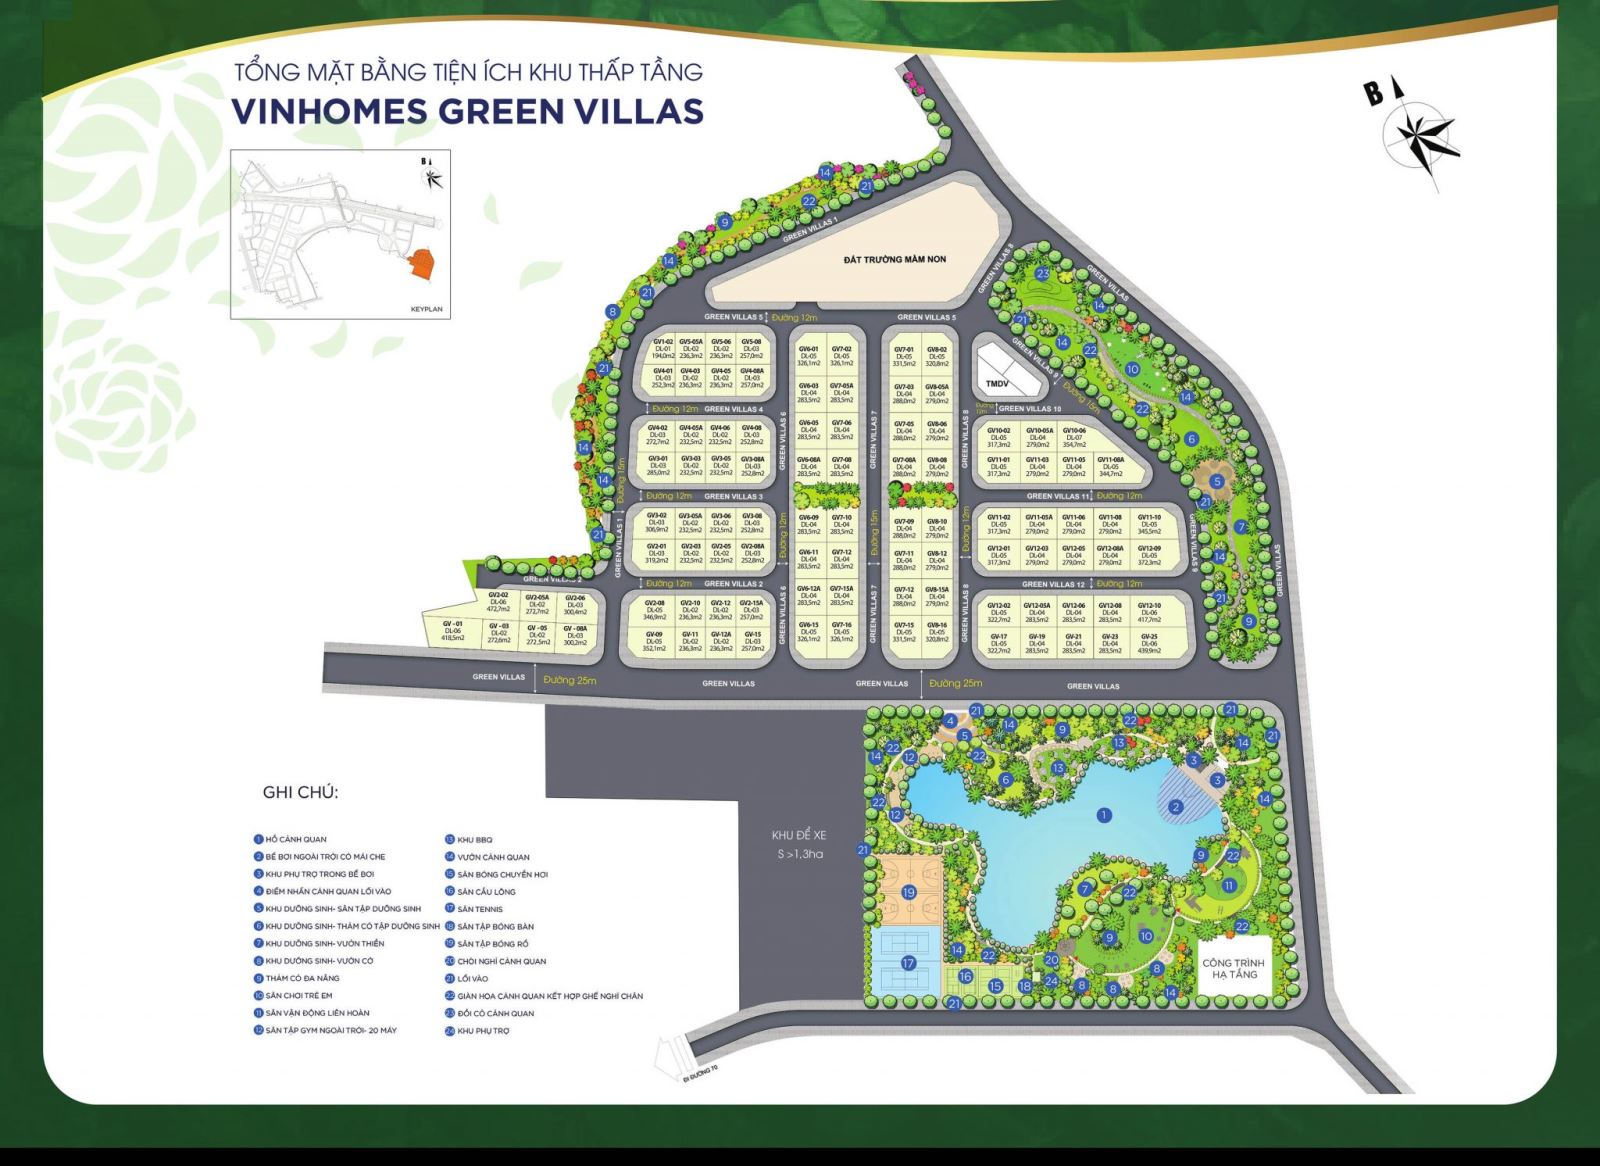 The ground planning of the Vinhomes Green Villas